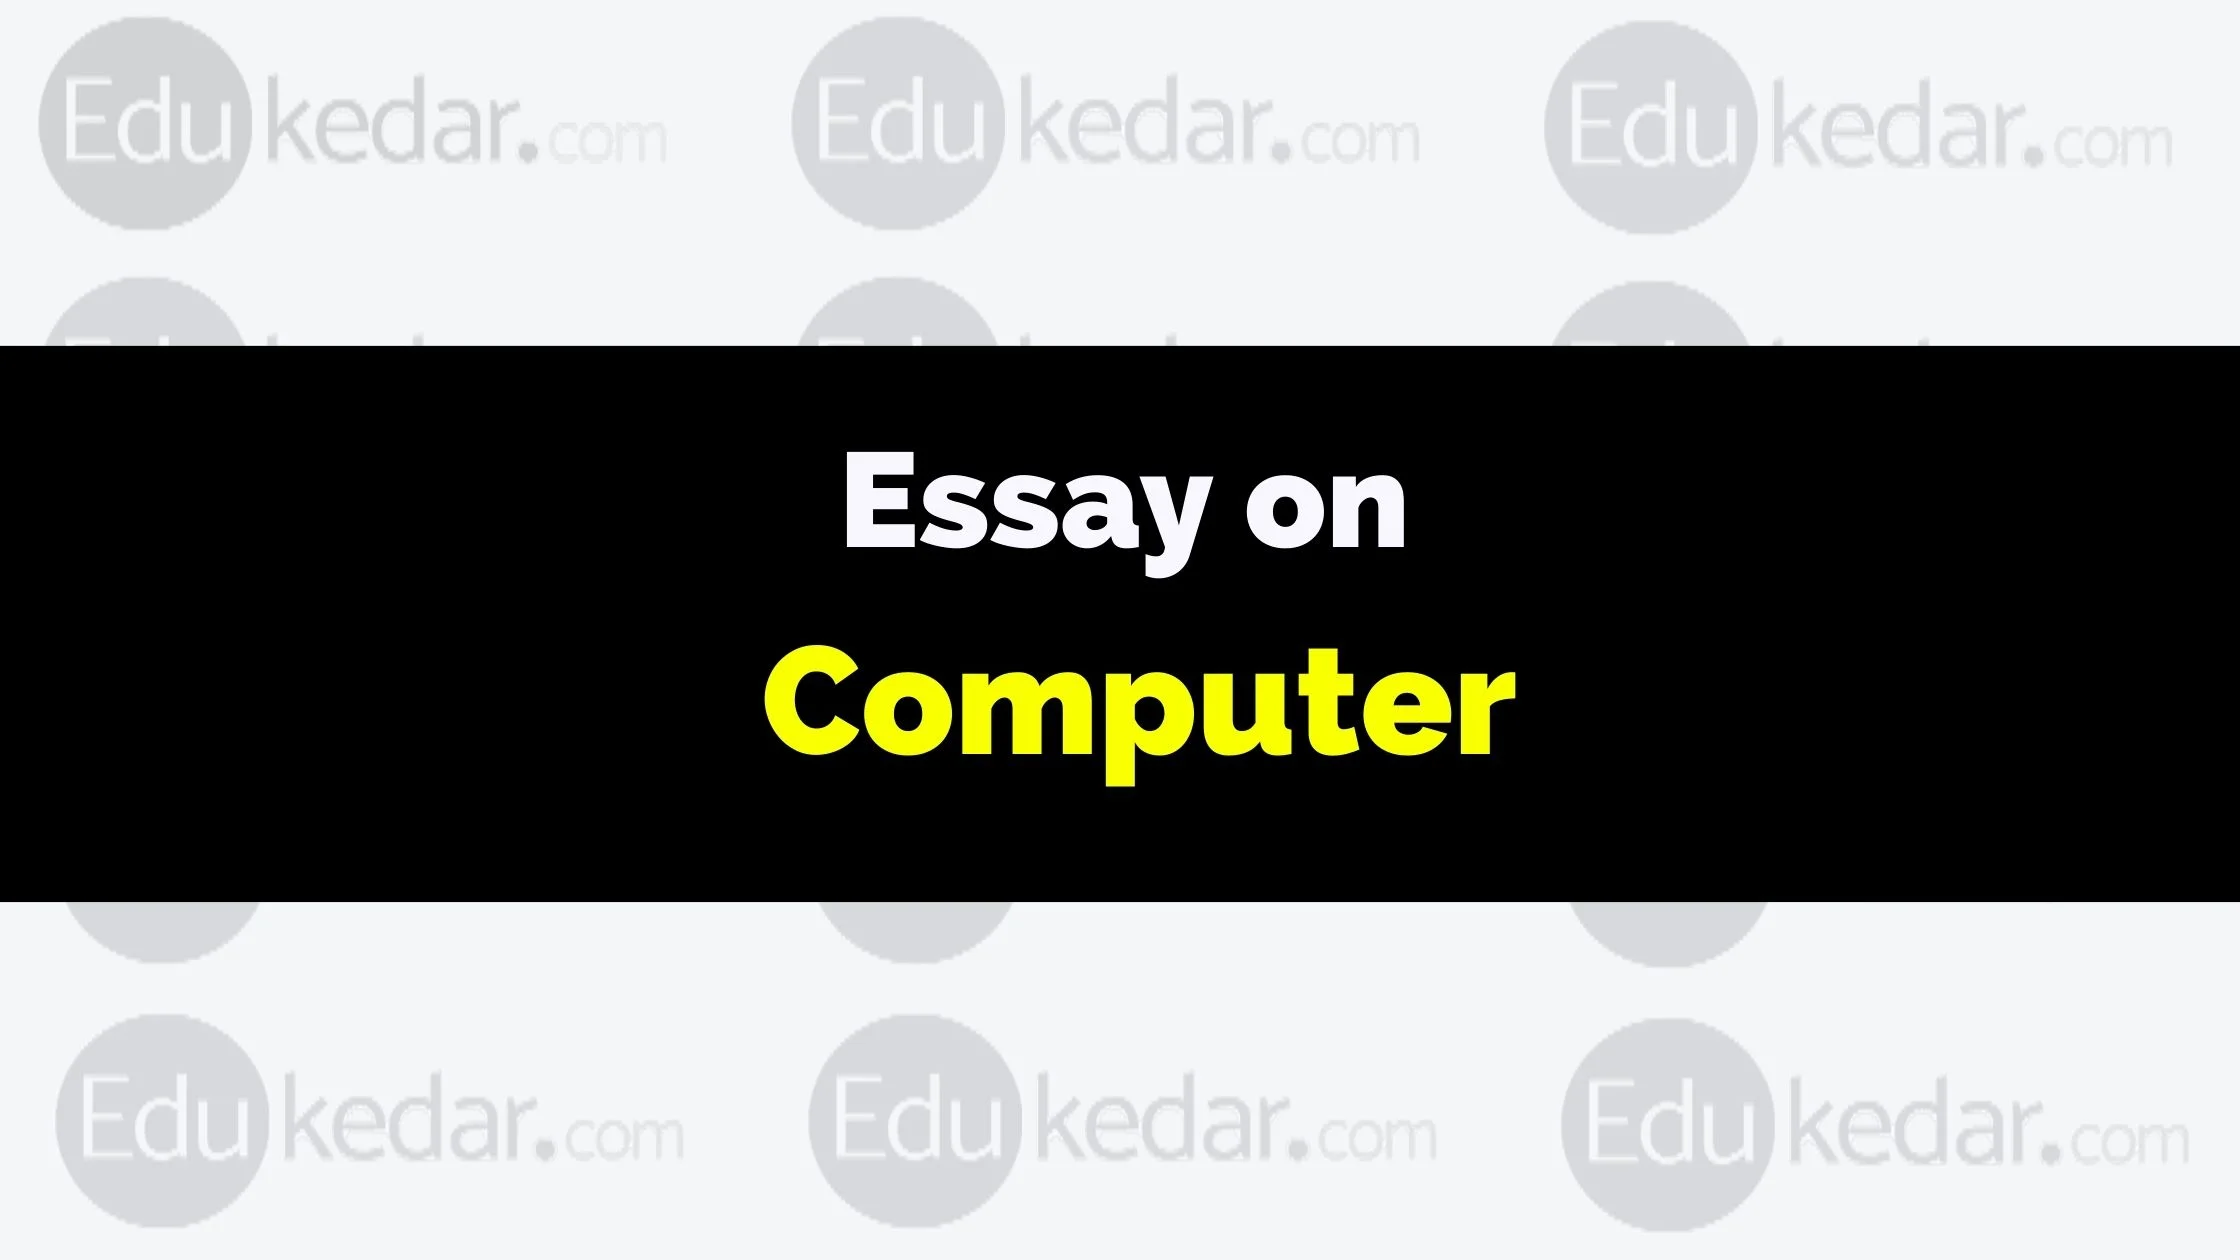 computer and its uses essay 150 words